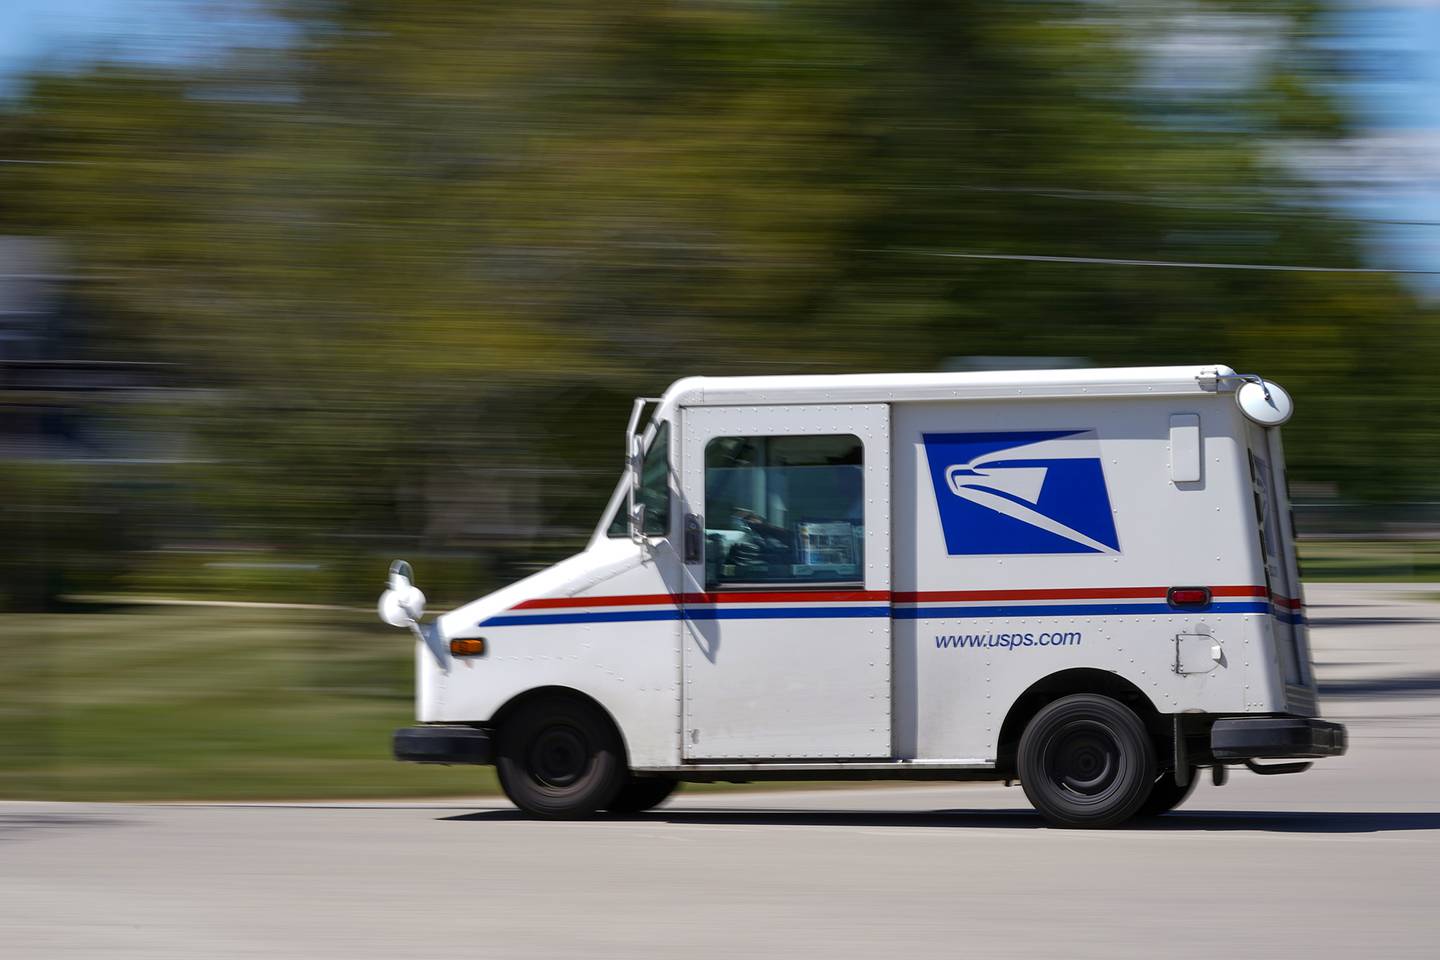 A mail truck moves down a street Aug. 18, 2020, in Fox Point, Wis.